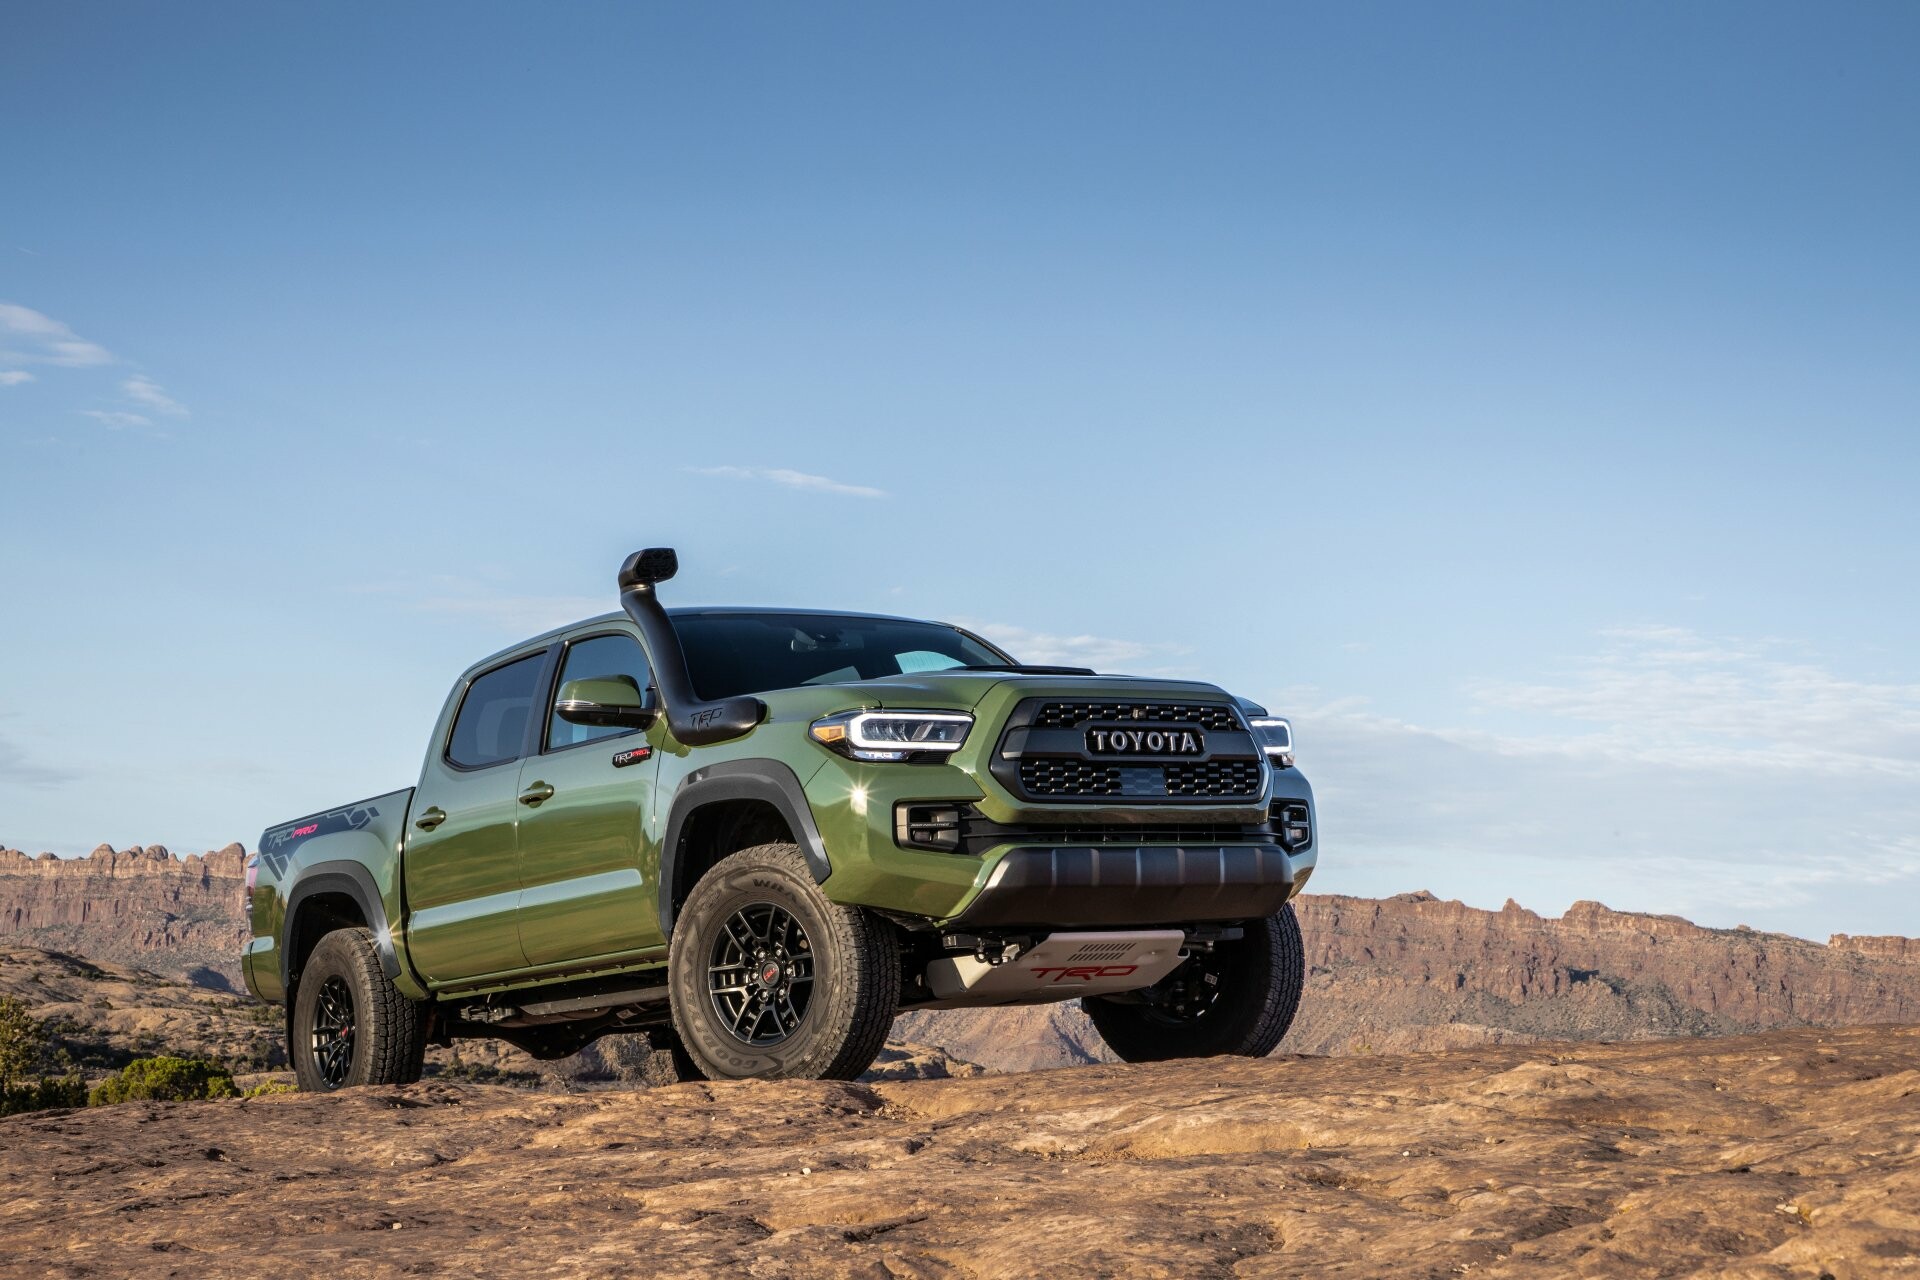 Toyota Tacoma: The "Ironman" edition features the TRD Supercharger and Magnaflow exhaust. 1920x1280 HD Background.